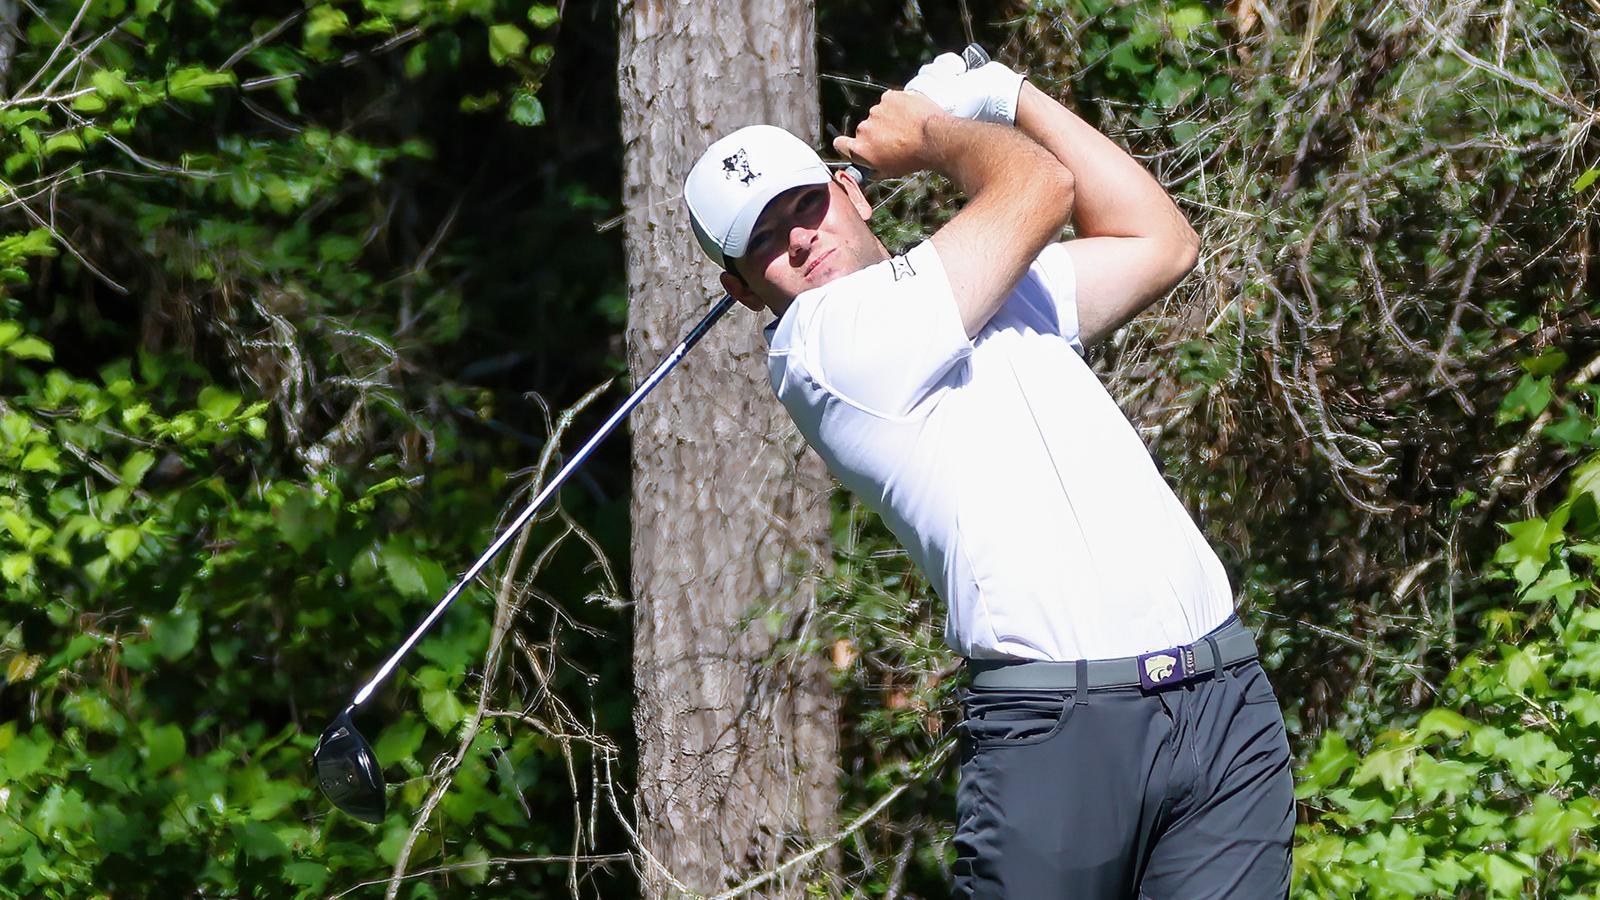 Kansas State Men’s Golf Team Holds 8th at Big 12 Championship, Cooper Schultz Tied for 9th